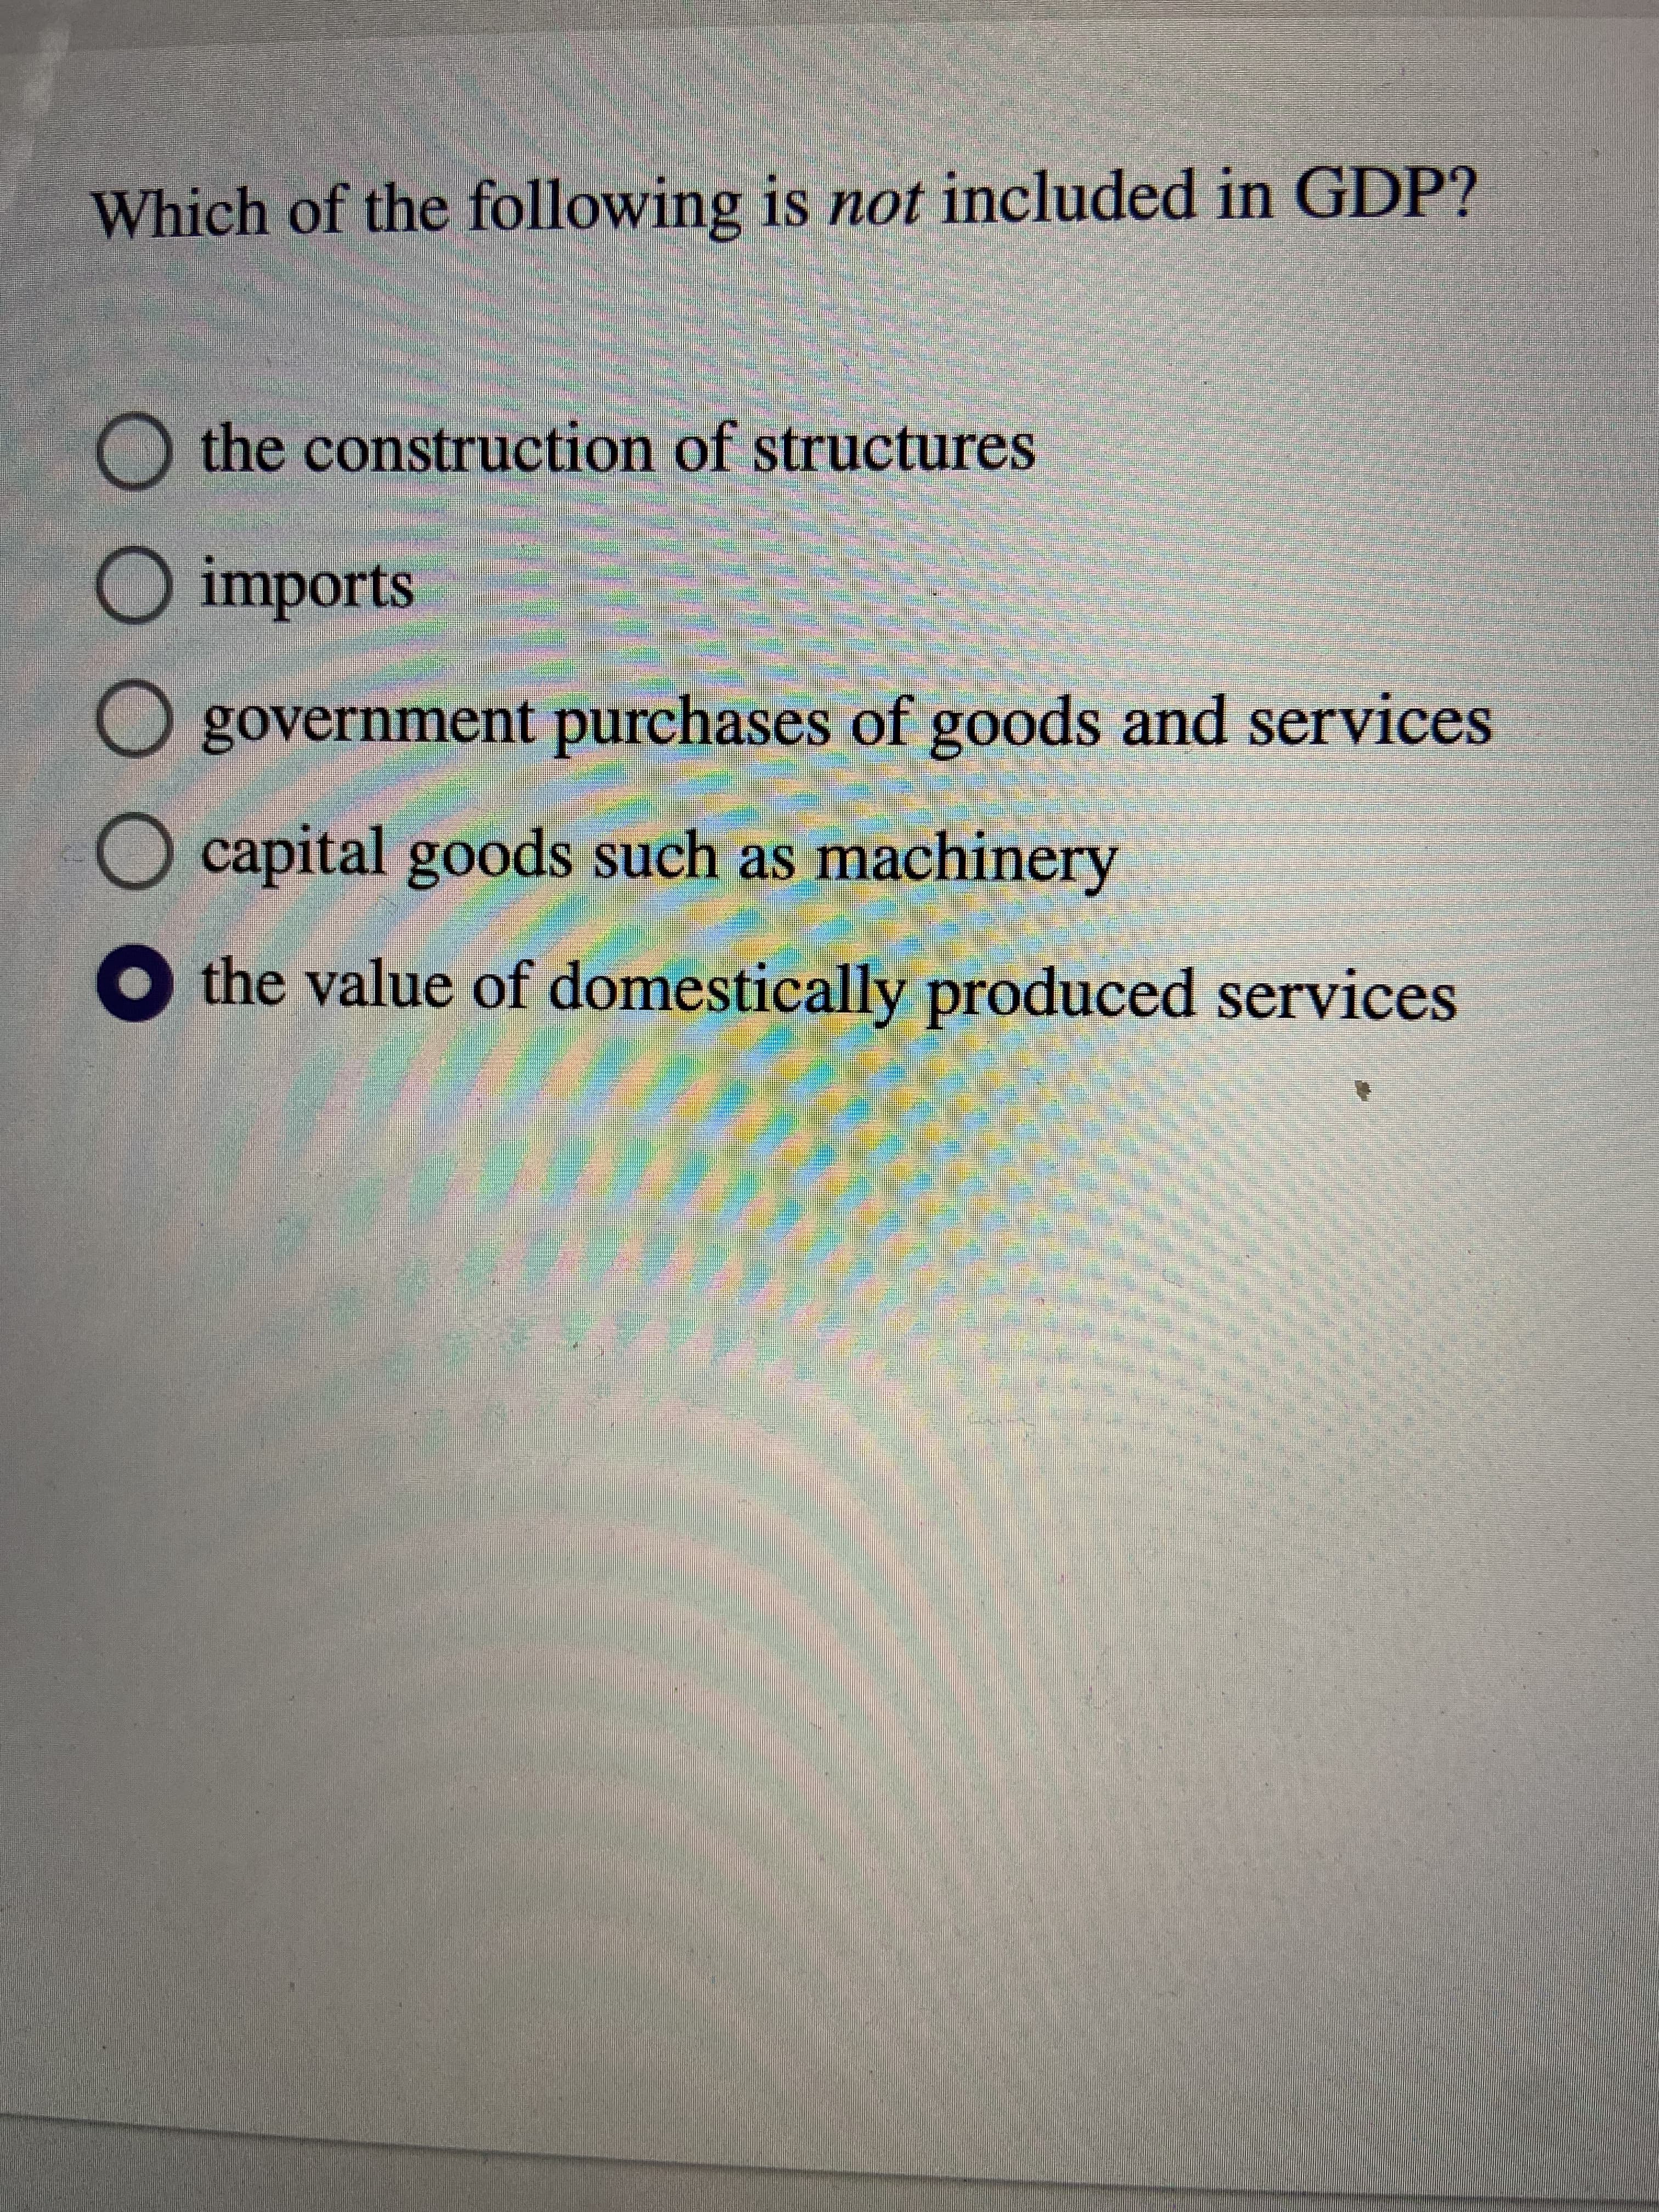 Which of the following is not included in GDP?
O the construction of structures
O imports
government purchases of goods and services
capital goods such as machinery
O the value of domestically produced services
